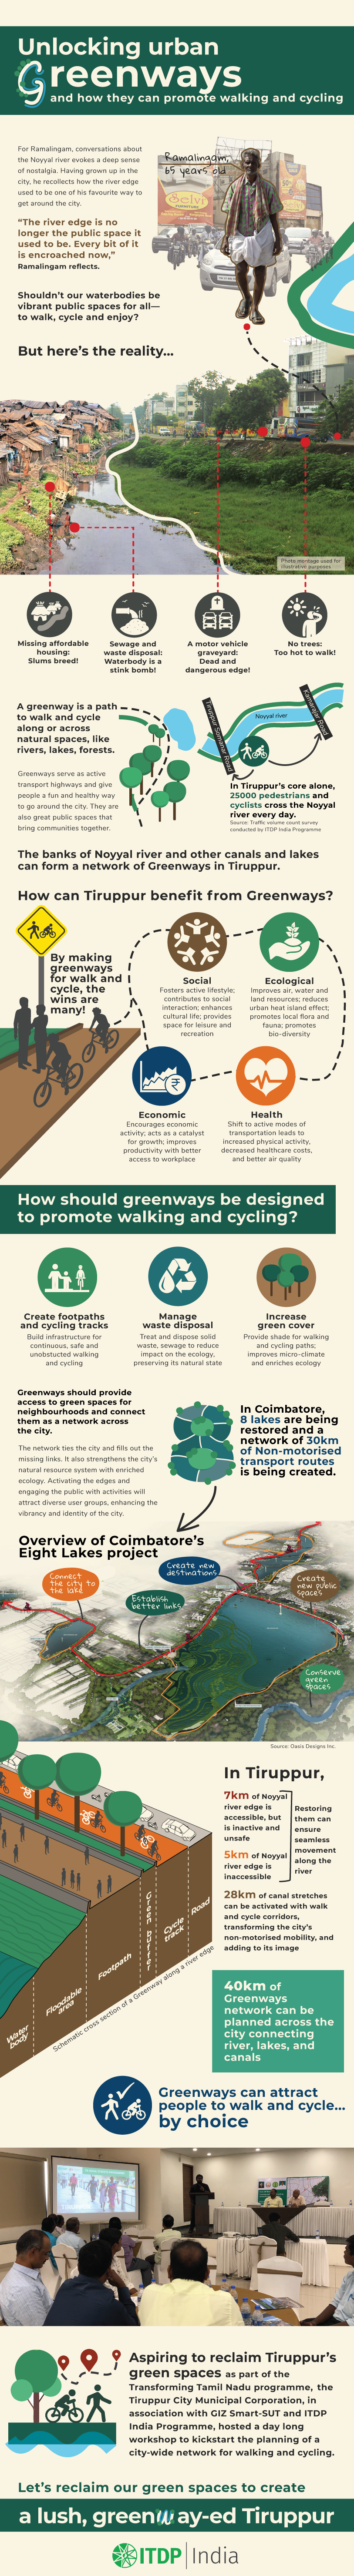 Infographic on Greenways in Tiruppur India